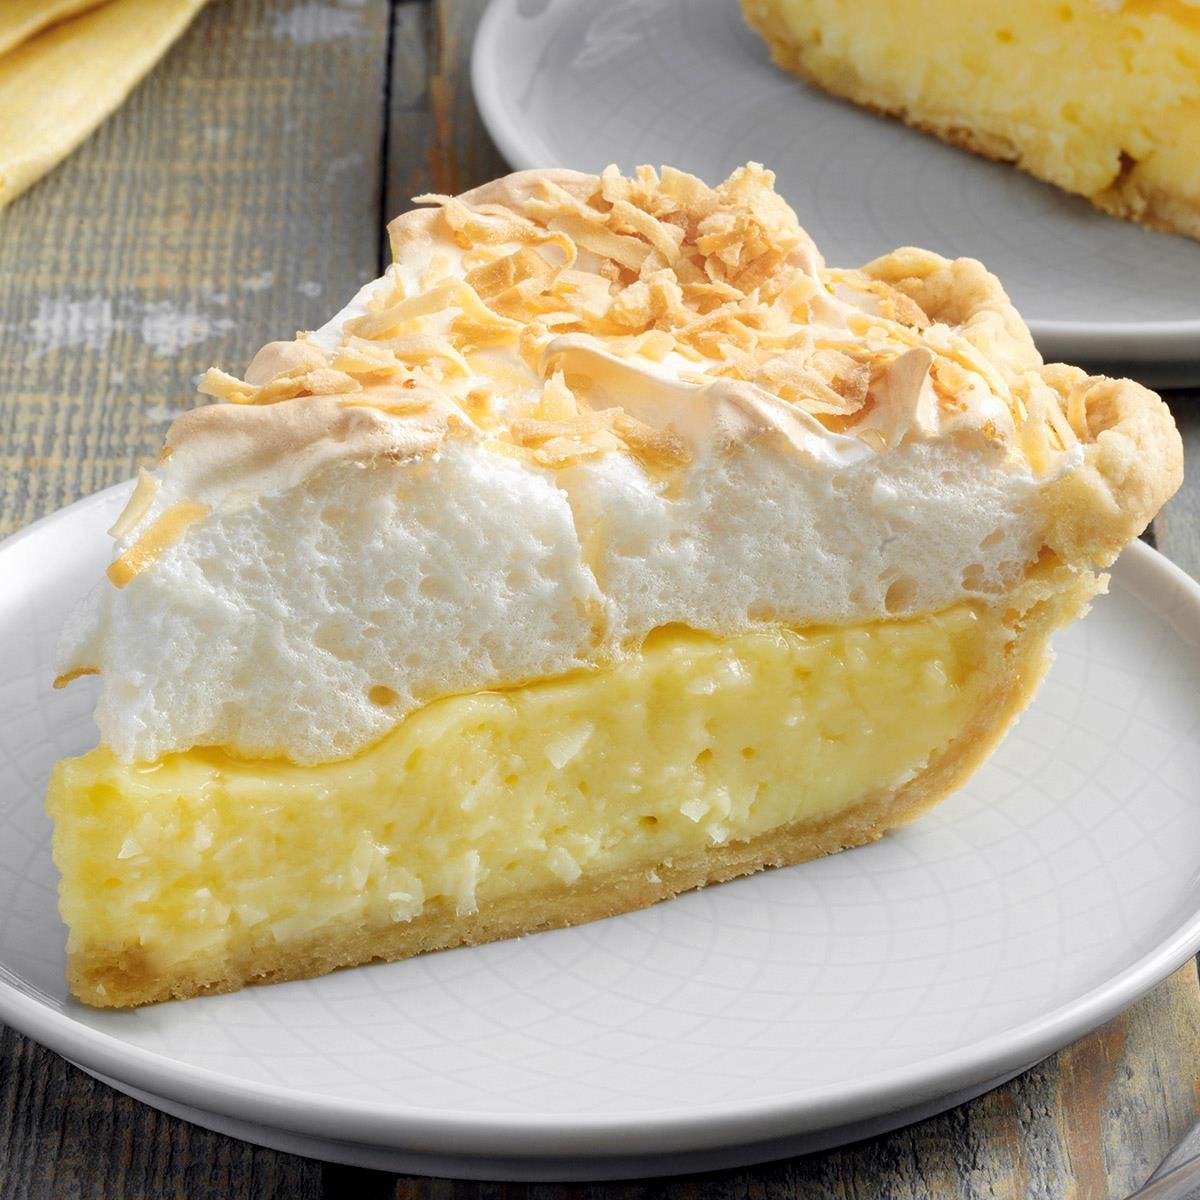 How To Store A Coconut Cream Pie With Meringue